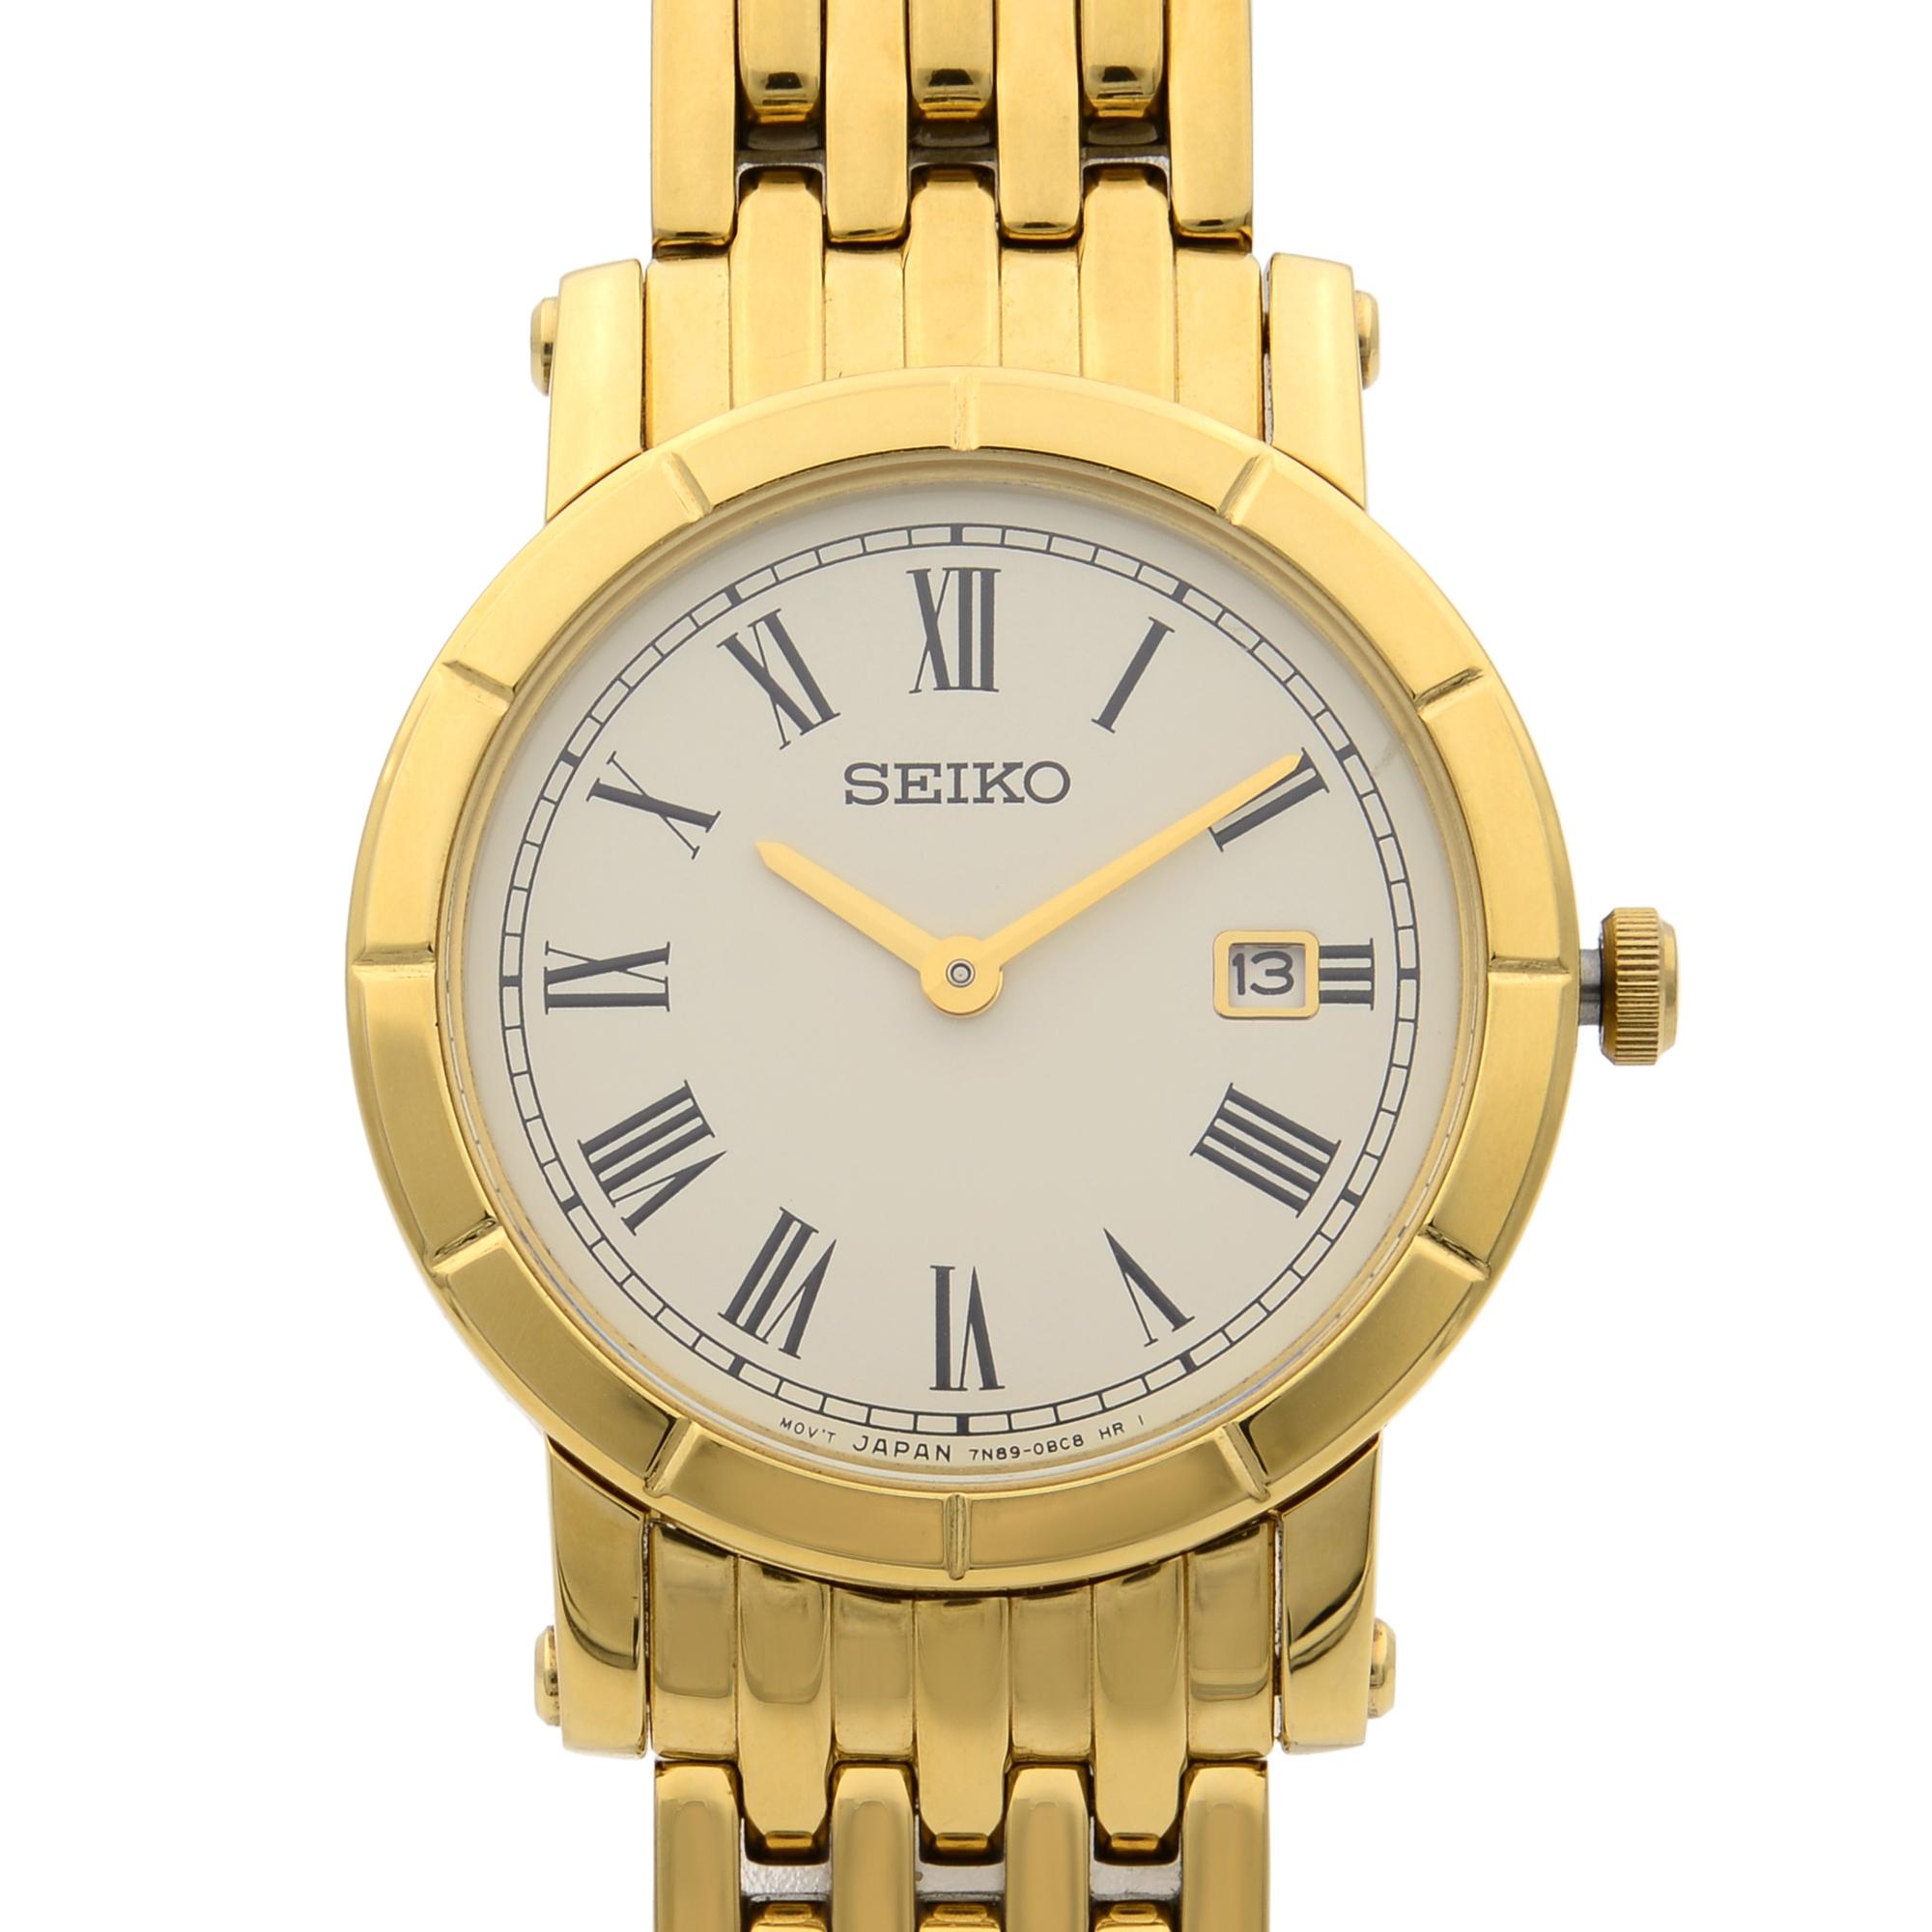 Pre-owned Seiko Date Gold-Tone Stainless Steel Beige Dial Ladies Quartz Watch SXB420P1. Minor Scratches and Blemishes on the Blemishes on the Gold-tone Case and Bracelet from Handling. This Beautiful Timepiece is Powered by a Quartz (Battery)